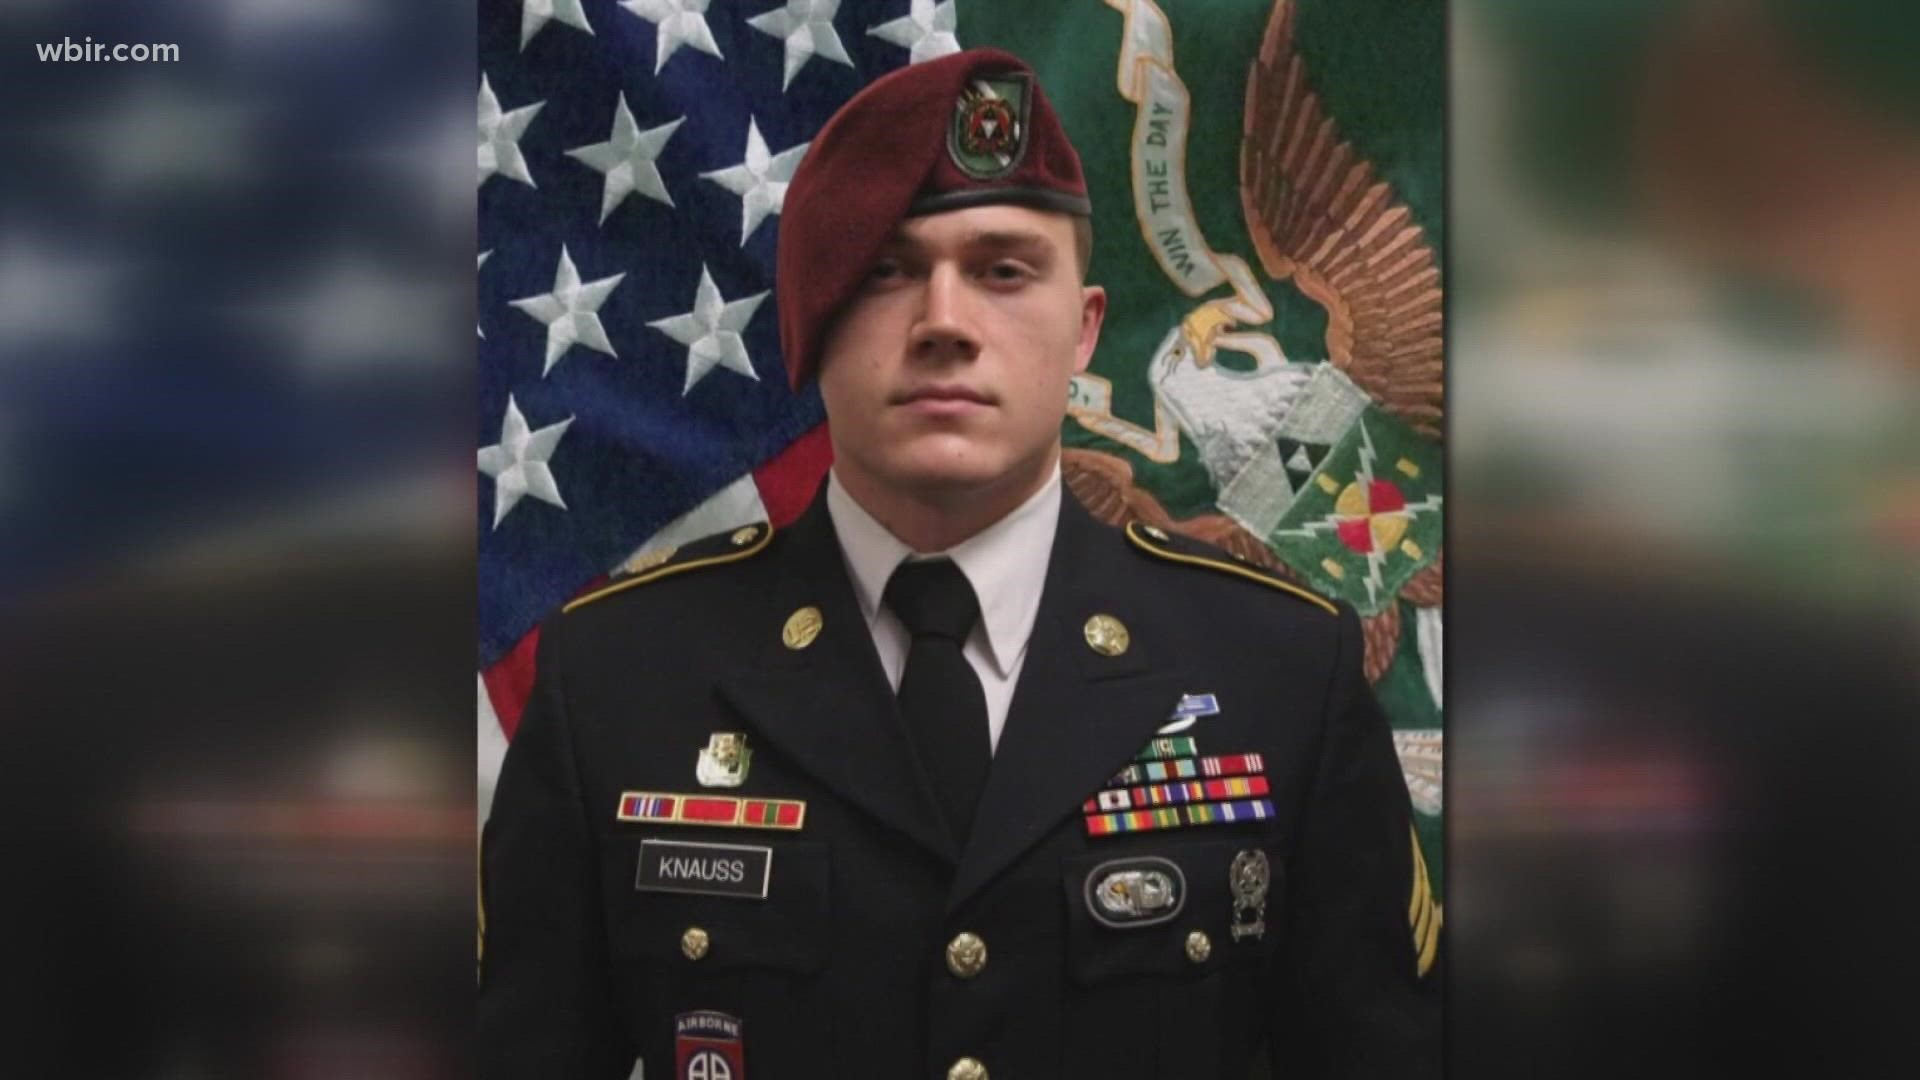 A bill is in the works that will name a portion of Tazewell Pike after Sgt. Knauss.